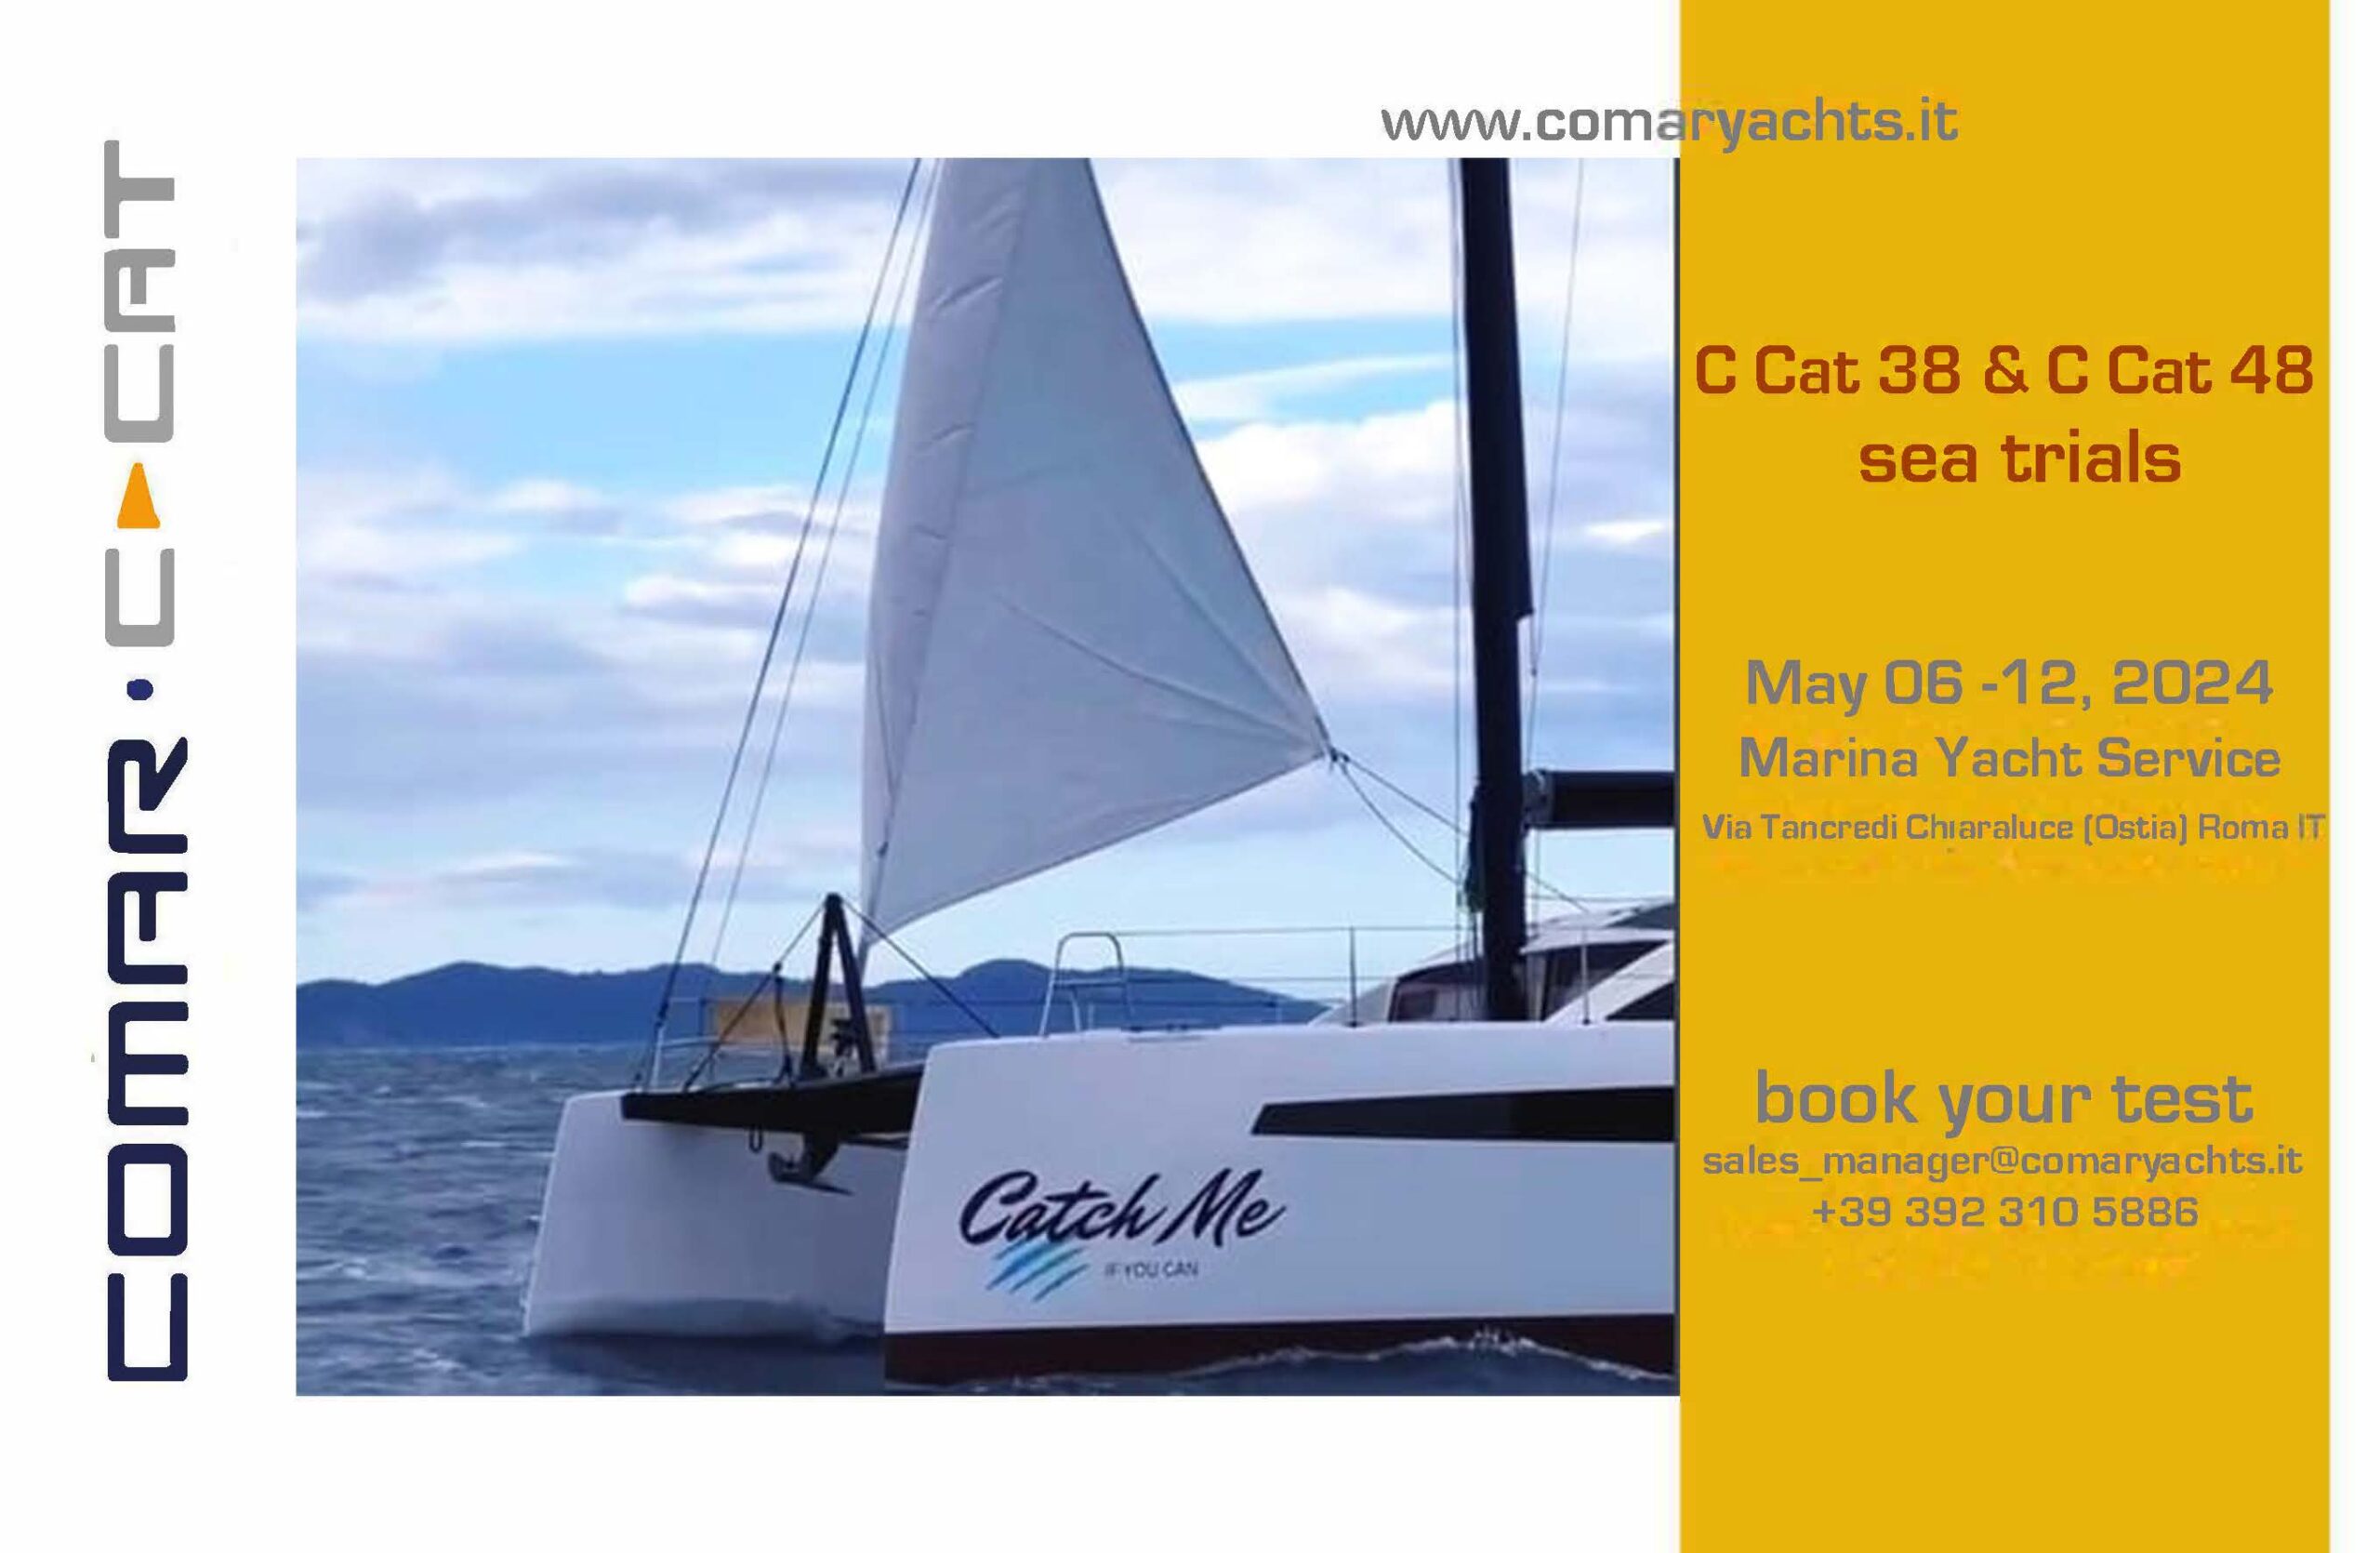 C CAT 38 e C CAT 48: one week for your test